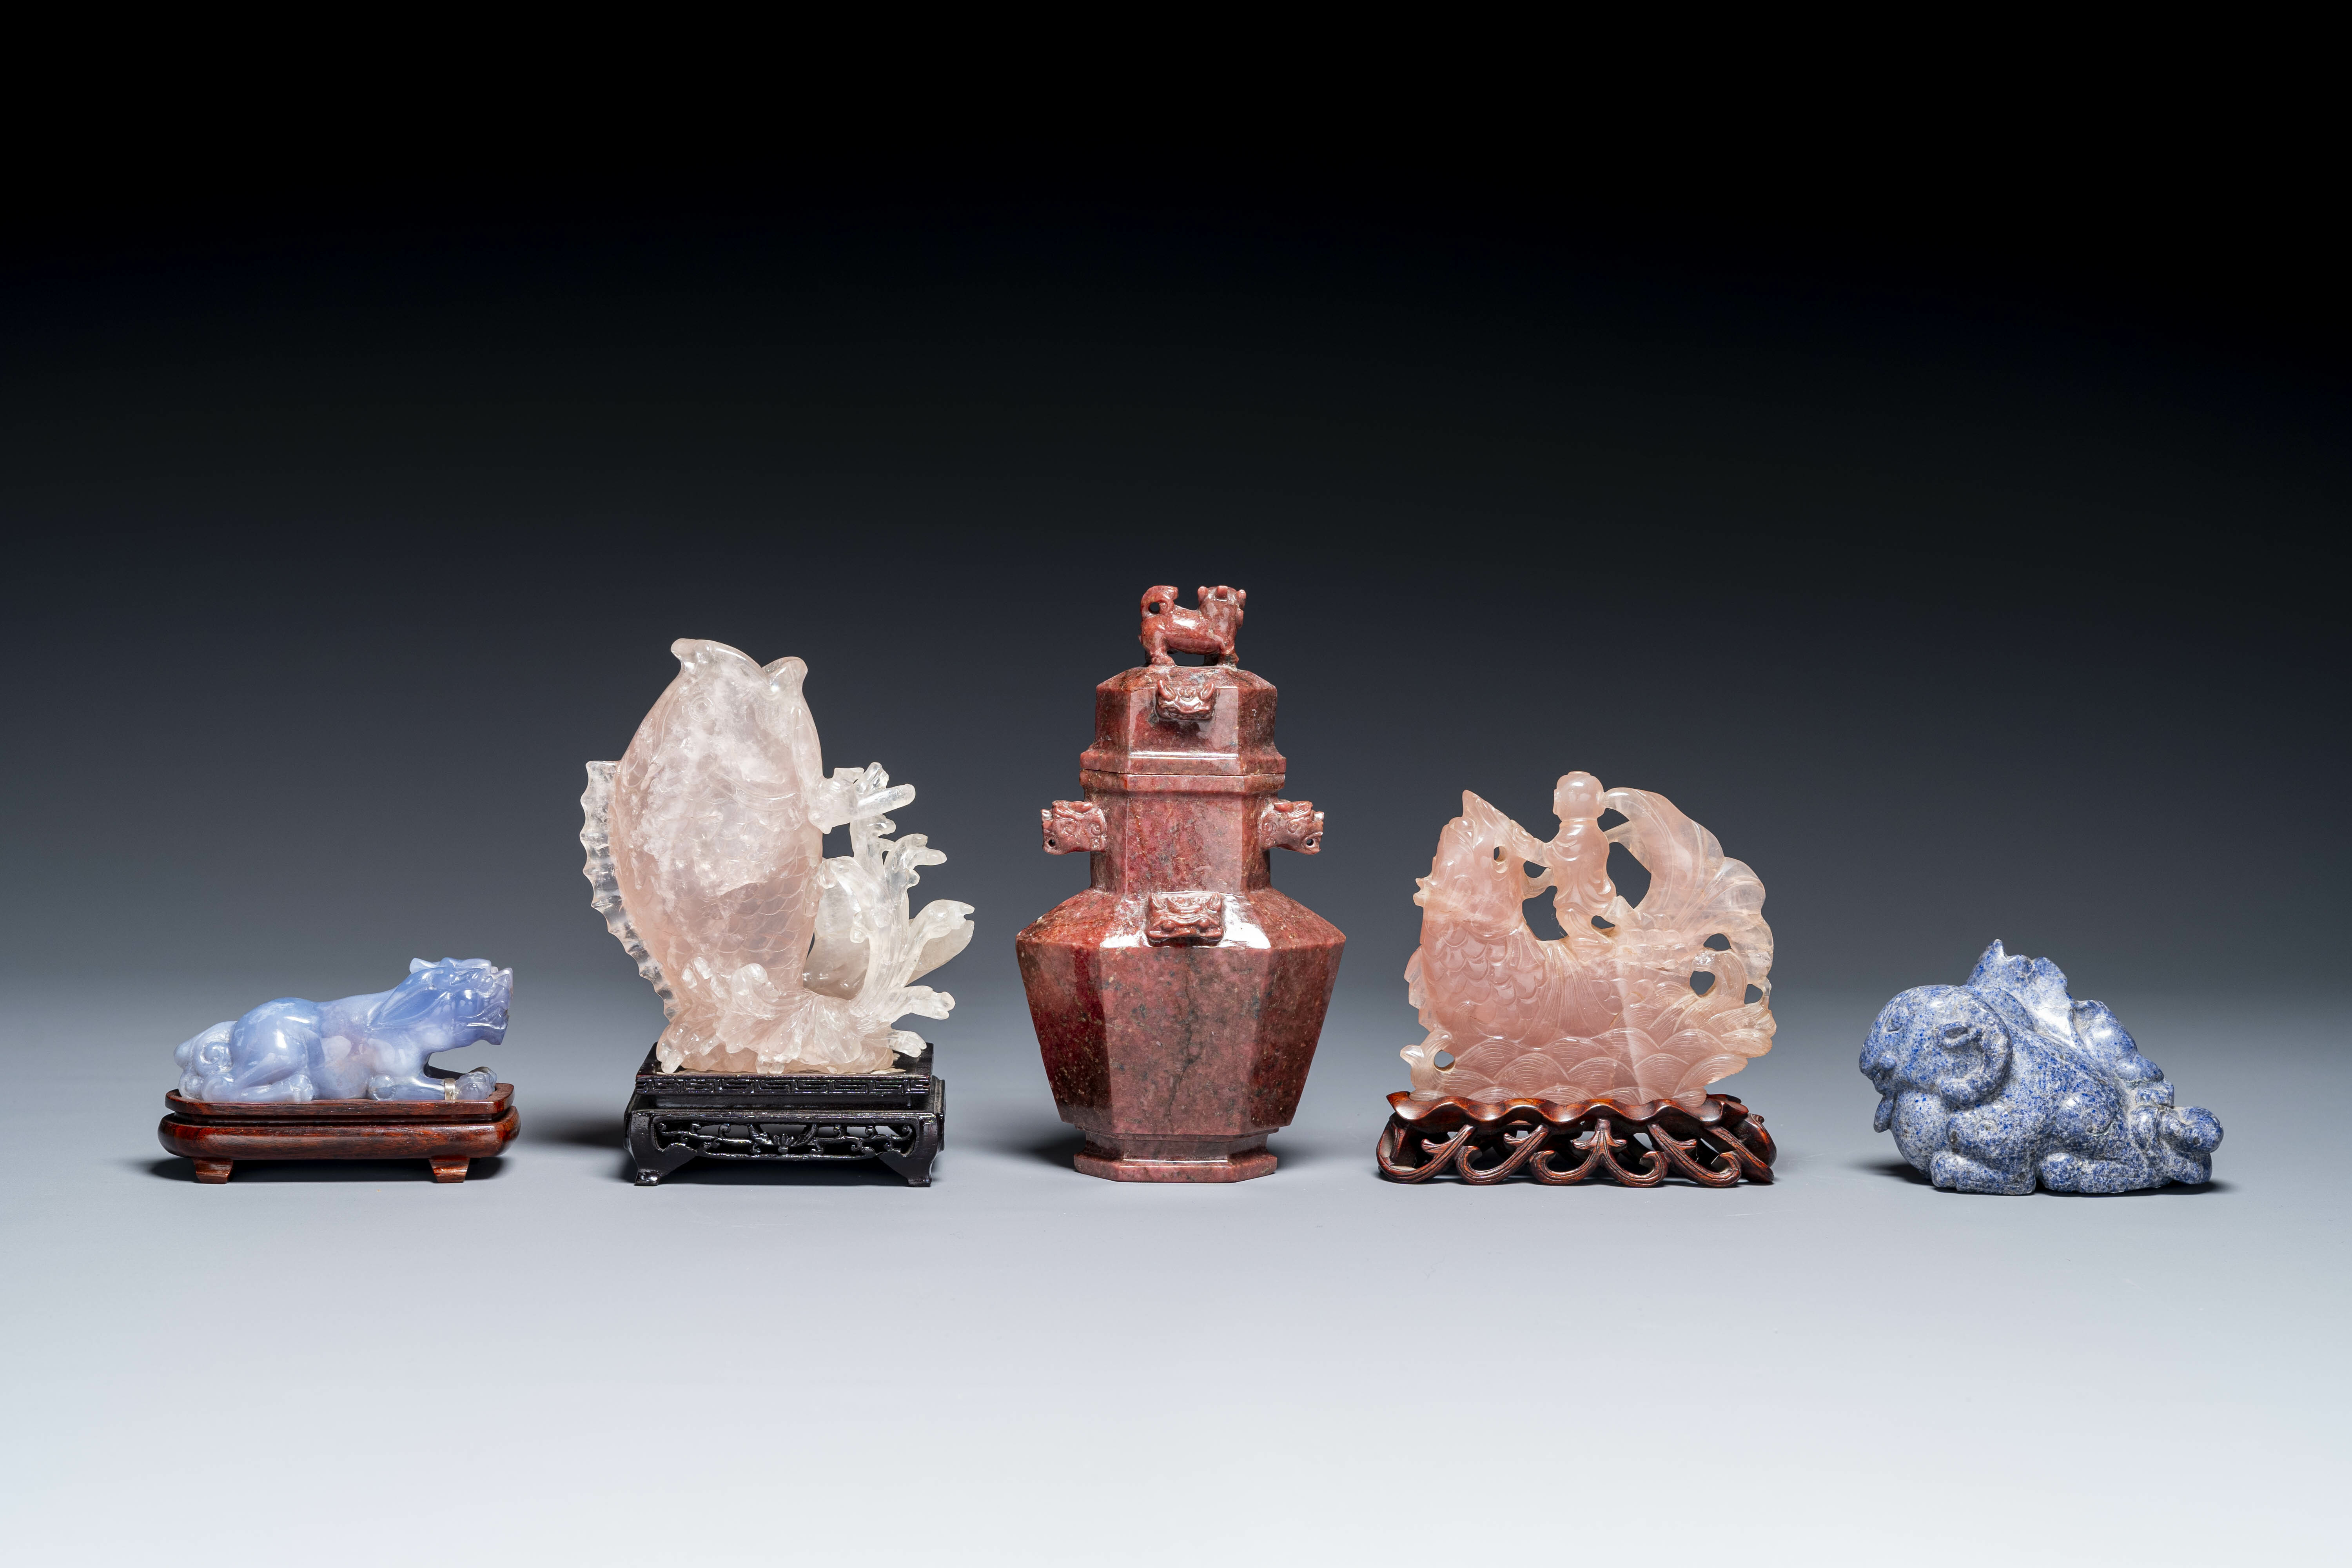 A group of Chinese carvings in lapis lazuli, pink quartz and other precious stones, with several sta - Image 3 of 8